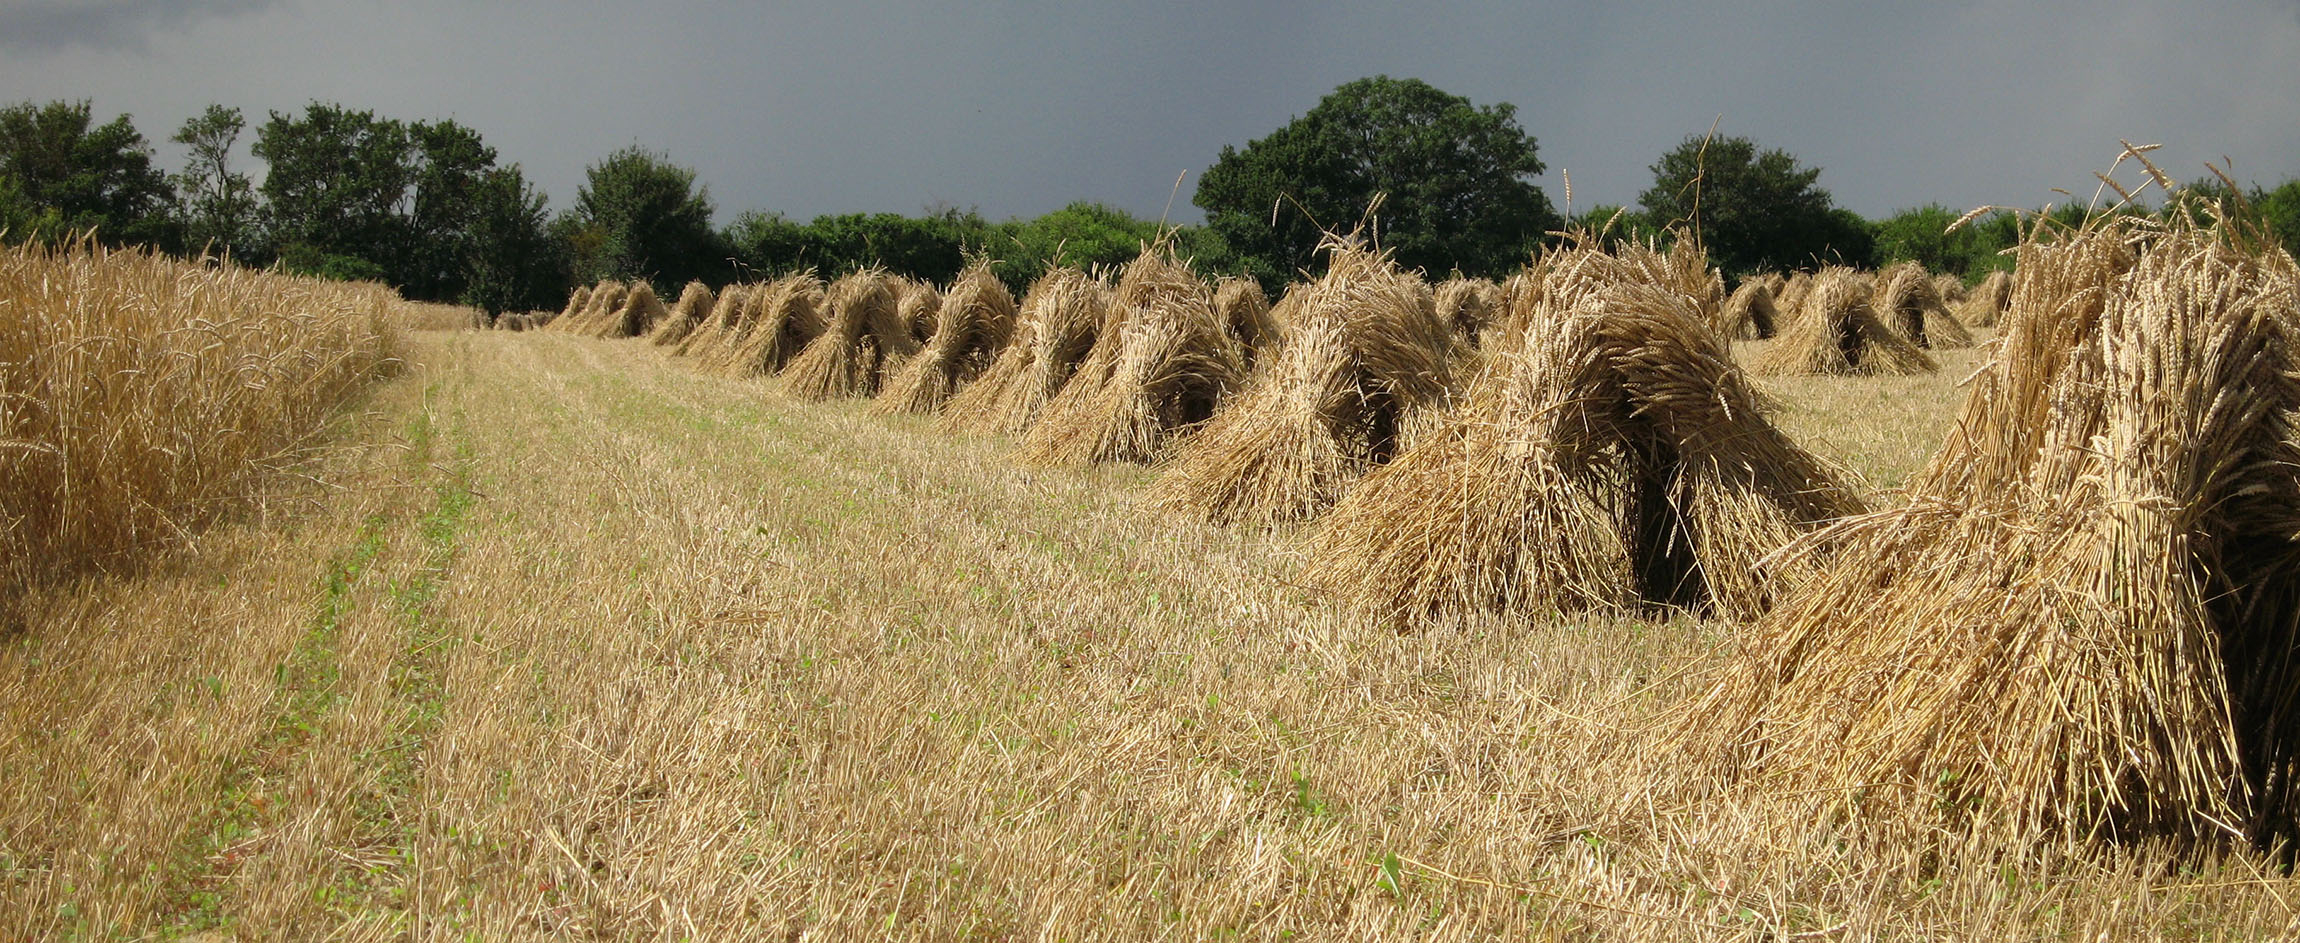 Sheaves of straw for use in thatched buildings